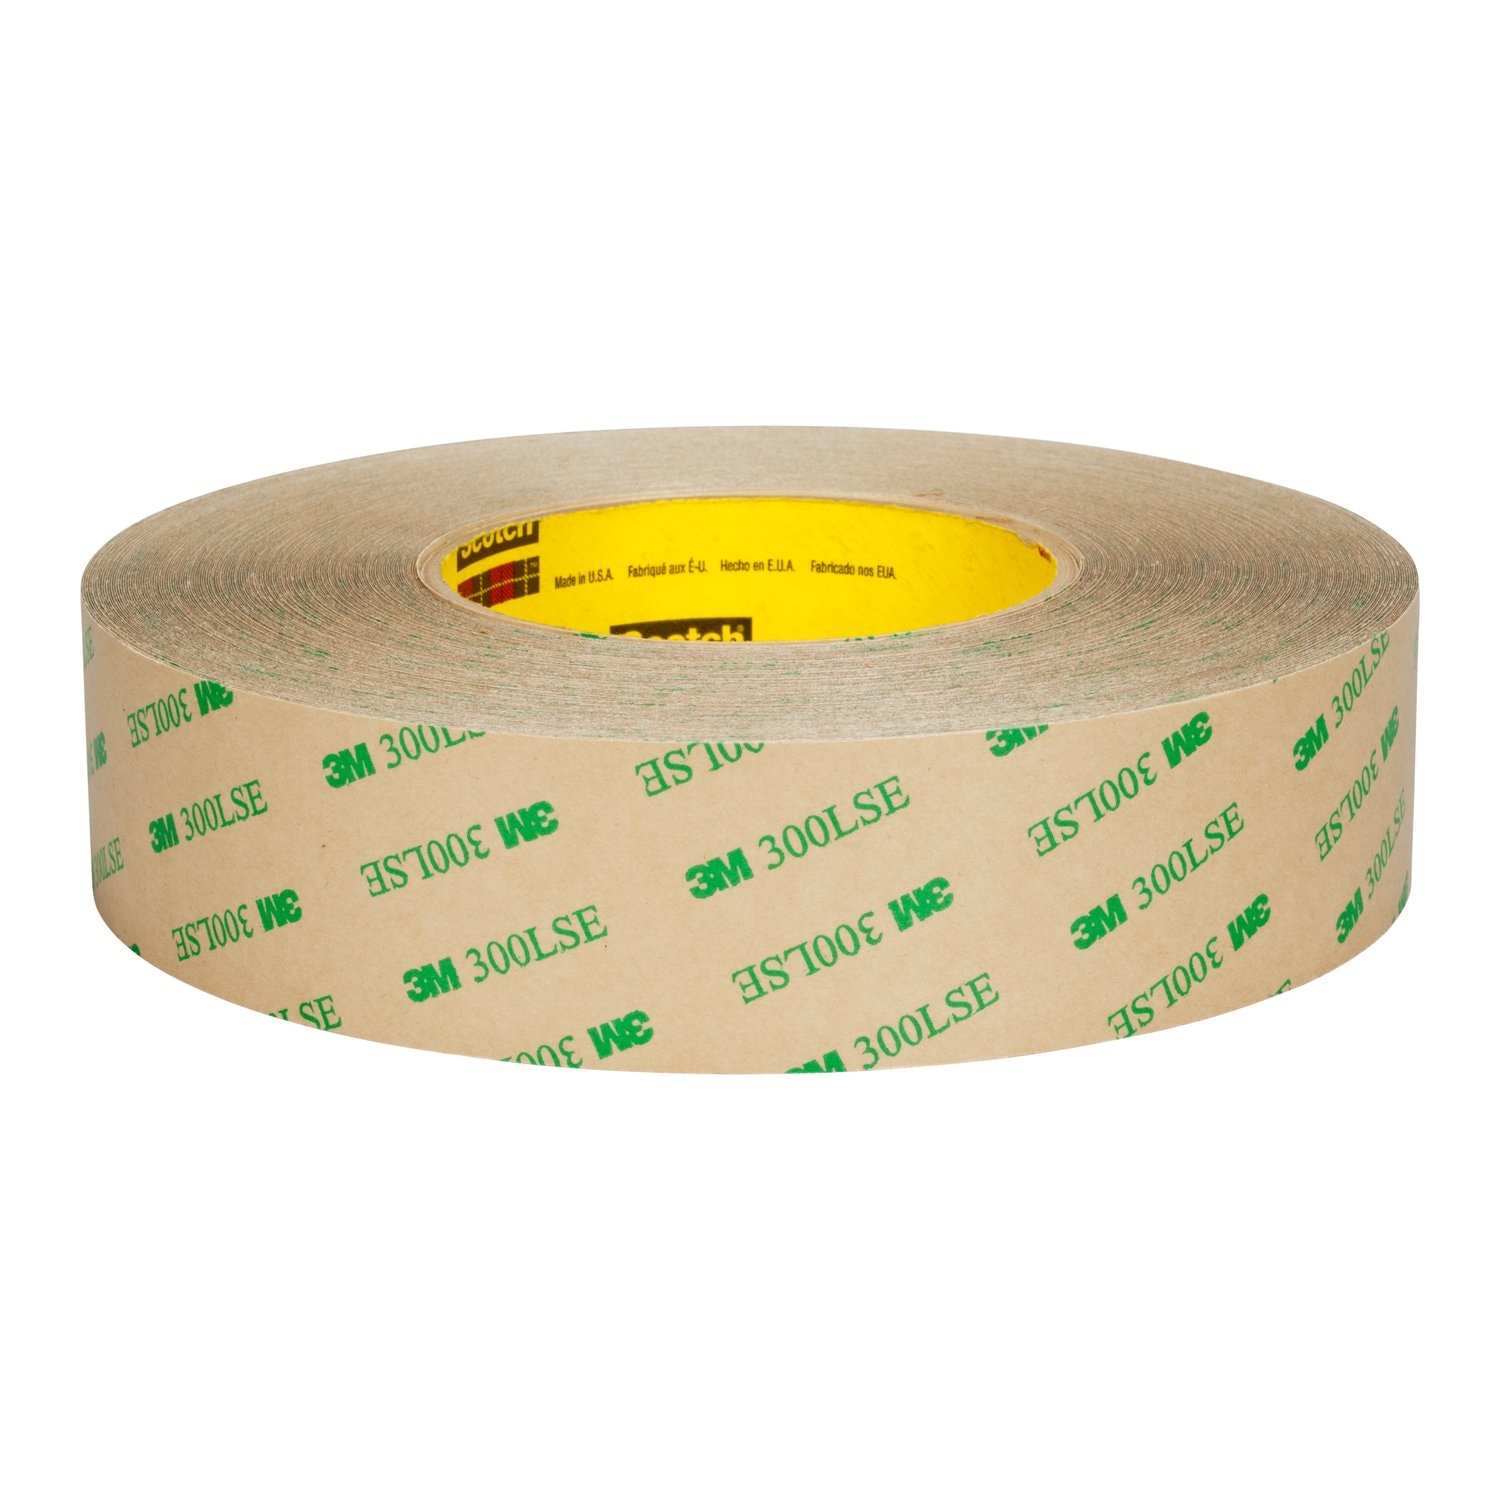 7000048892 - 3M Adhesive Transfer Tape 9672LE, Clear, 24 in x 60 yd, 5 mil, 1 roll
per case